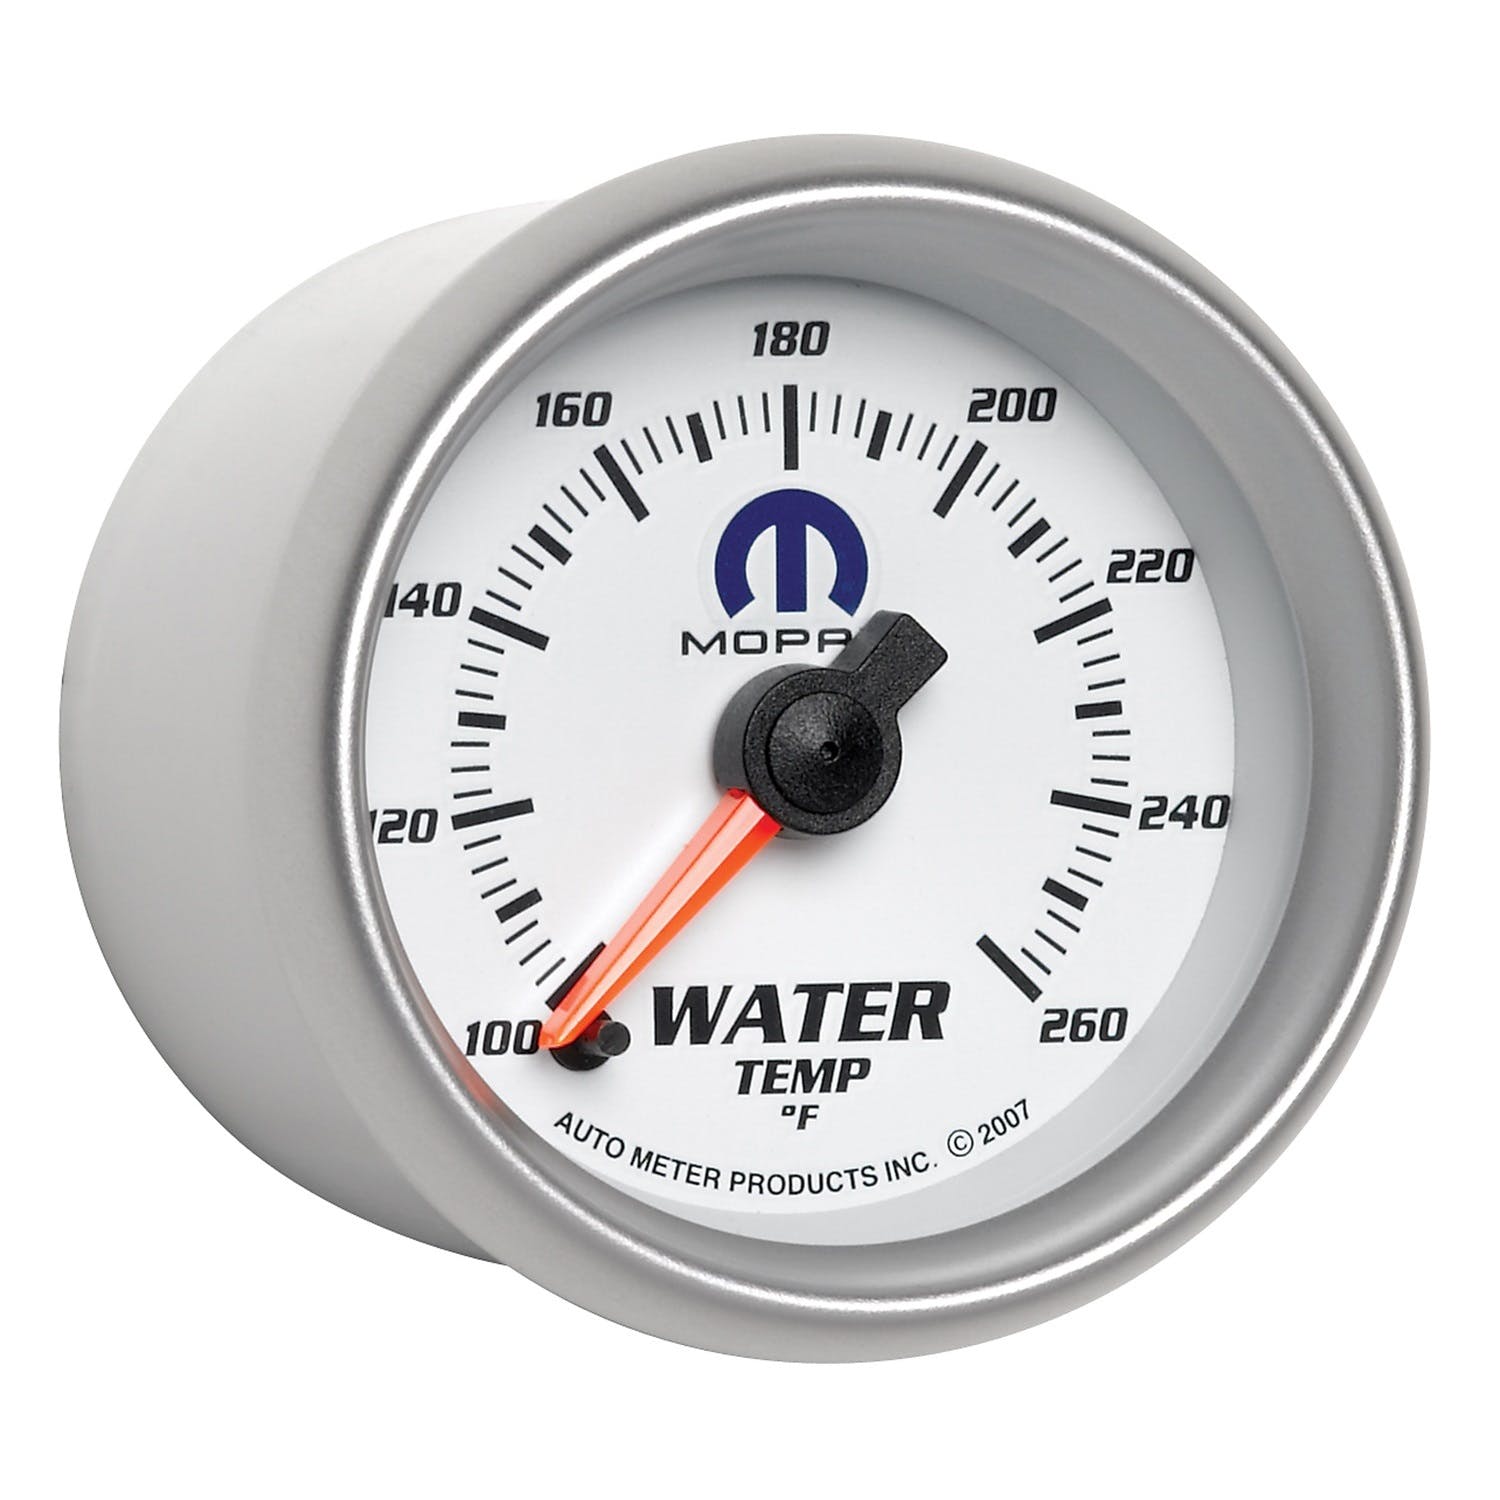 AutoMeter Products 880032 Mopar #77060052, 2-1/16 Water Temp, 100-260° F